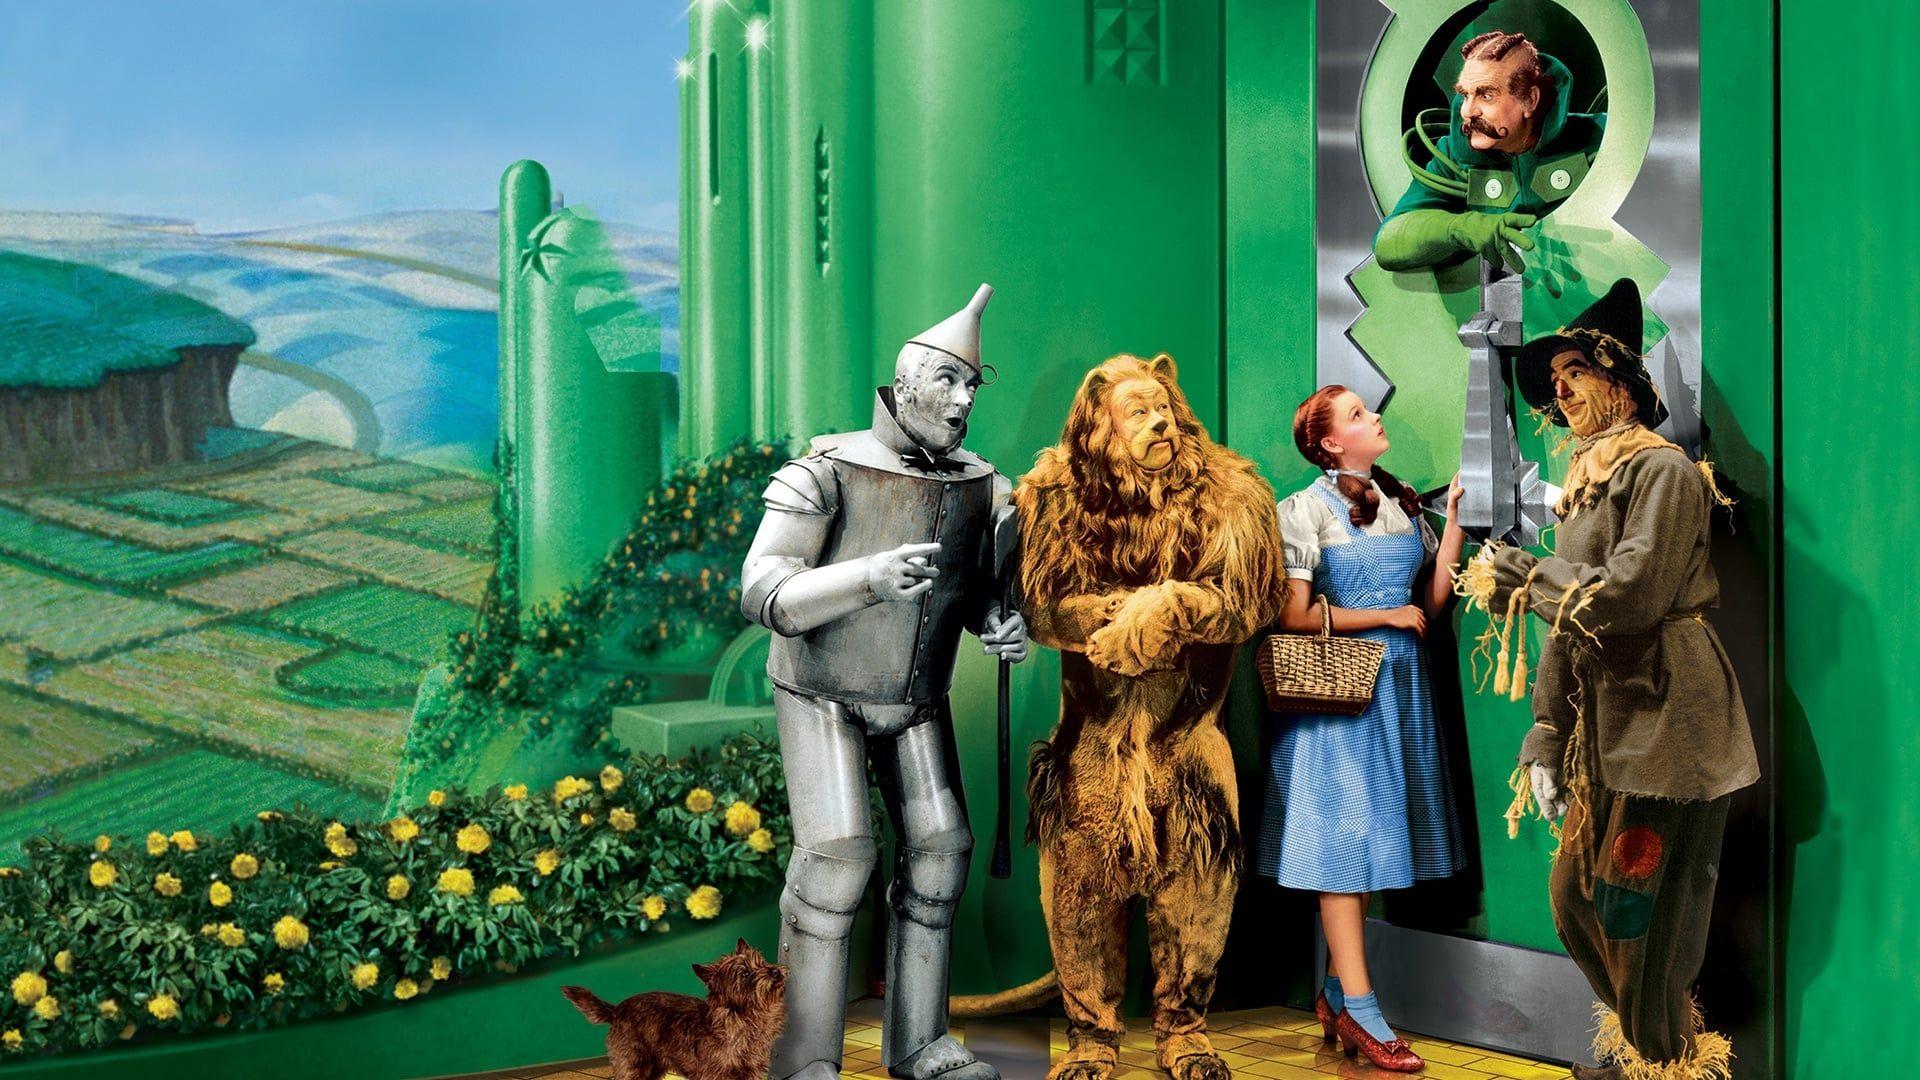 HBO Max hosts a wide range of classic movies like The Wizard of Oz.